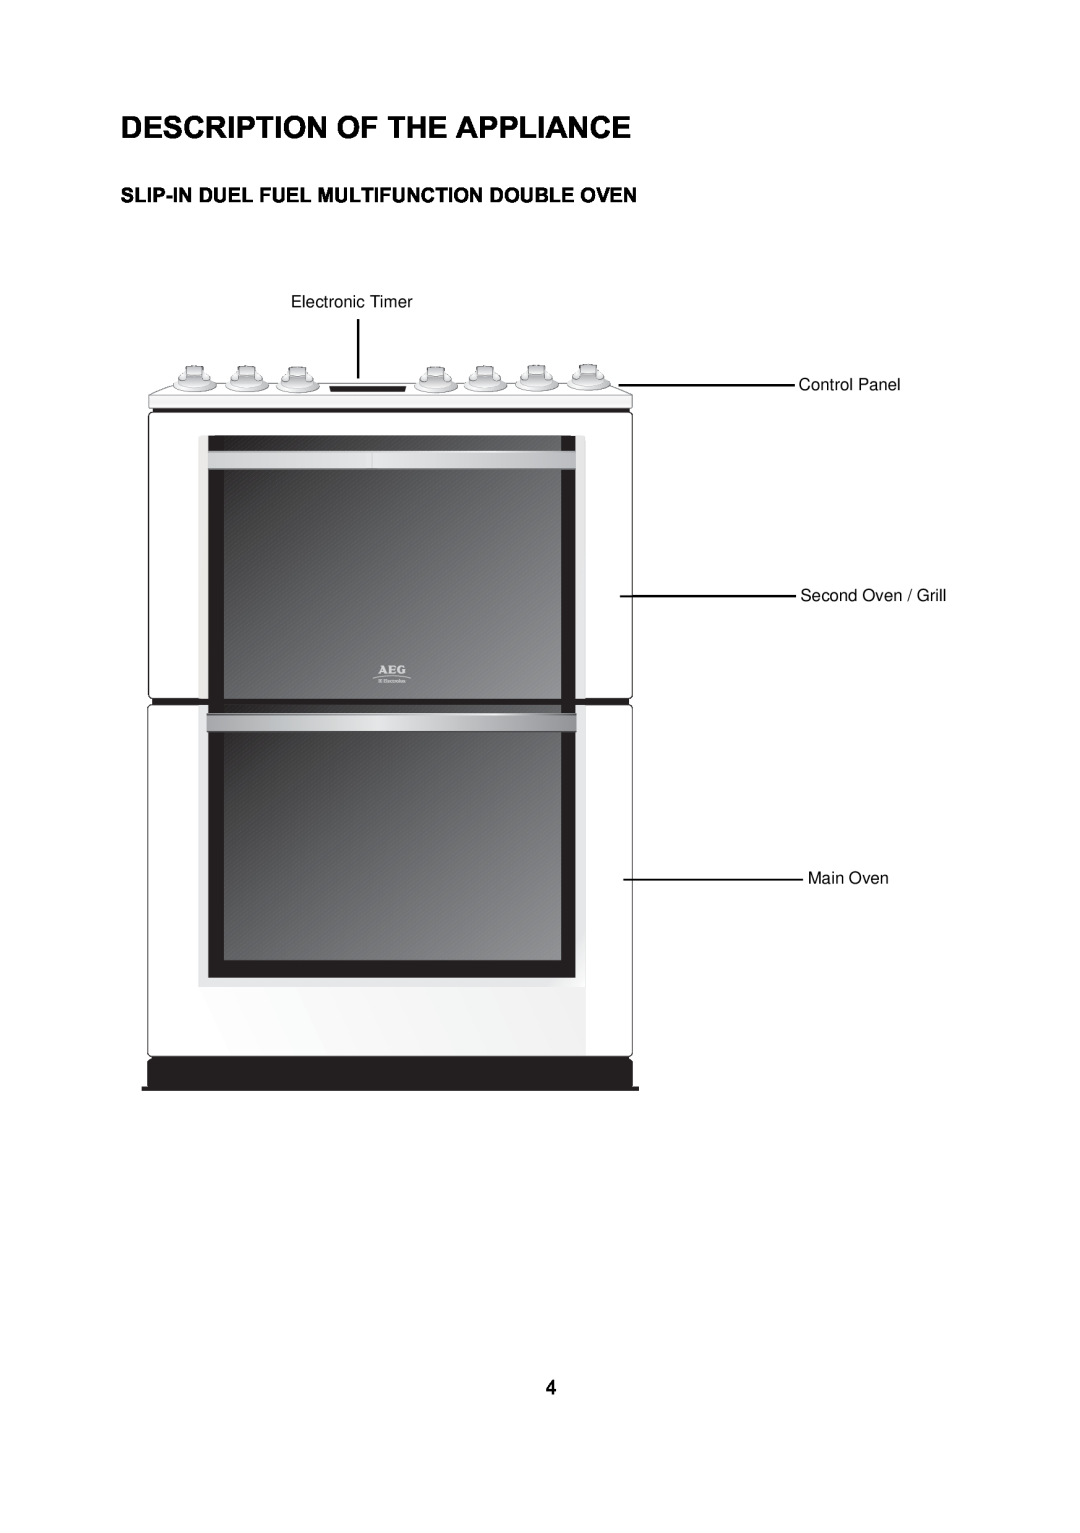 Electrolux D77000 user manual Description Of The Appliance, Slip-In Duel Fuel Multifunction Double Oven 